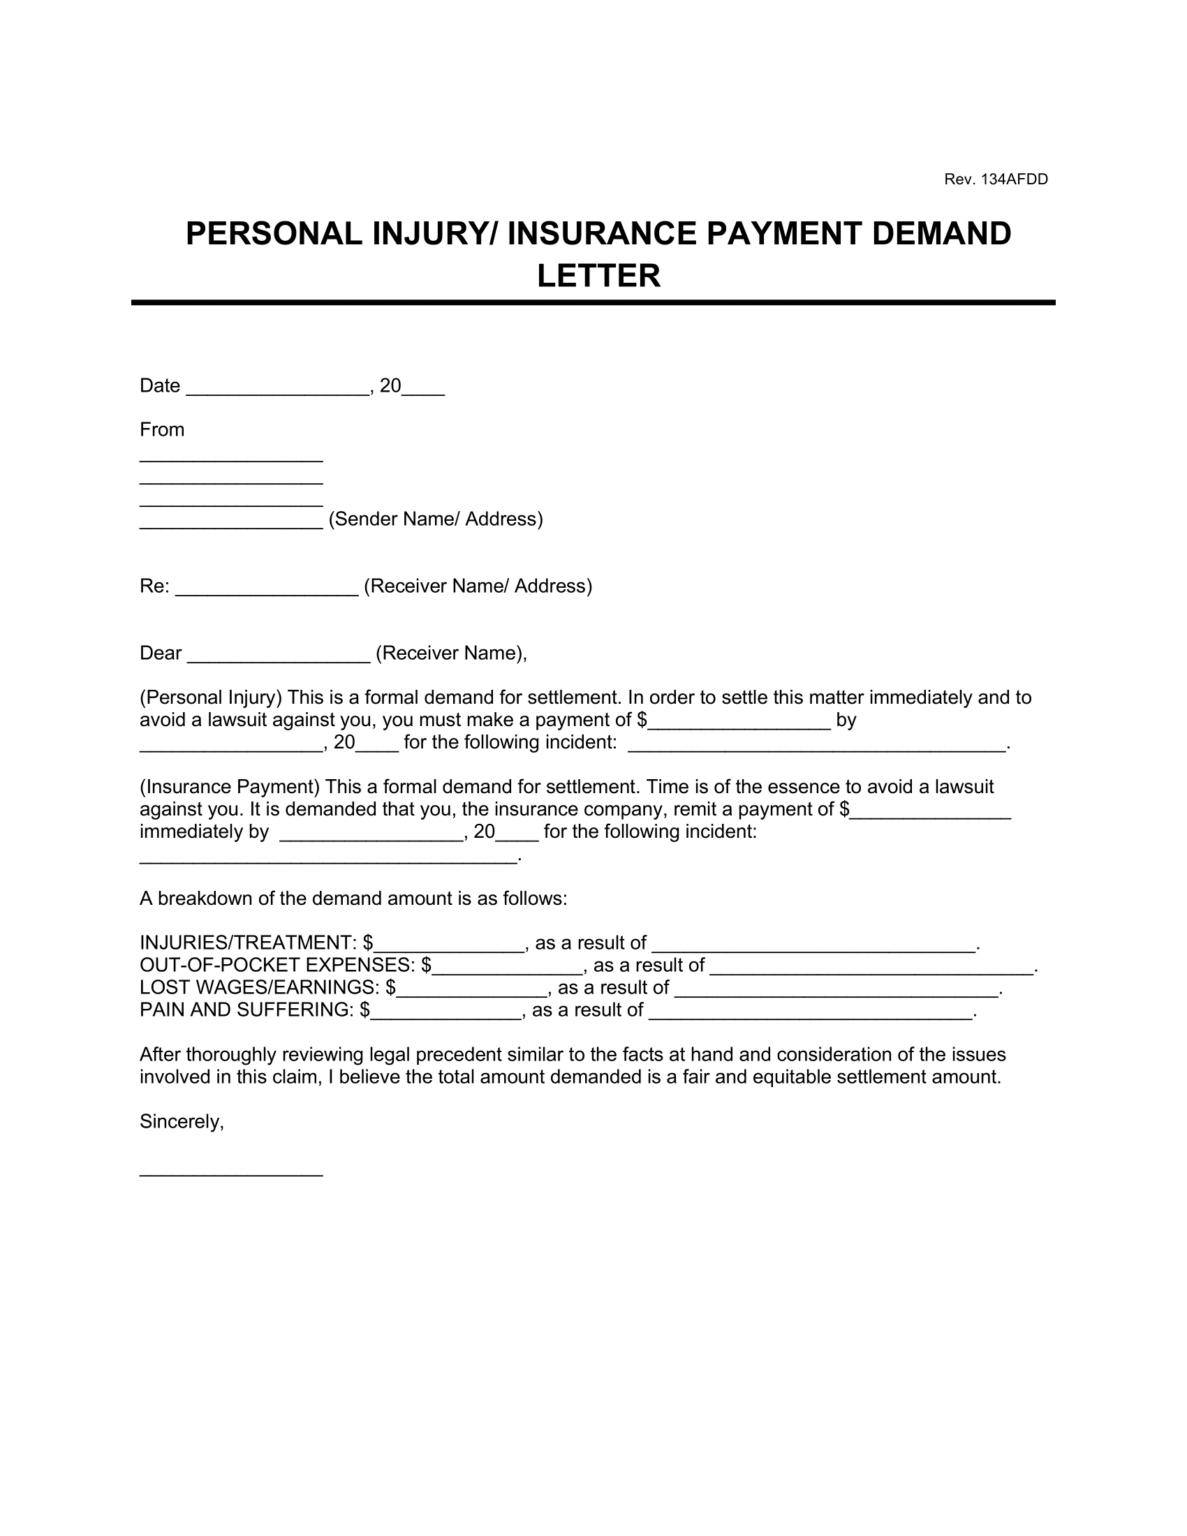 representation letter personal injury